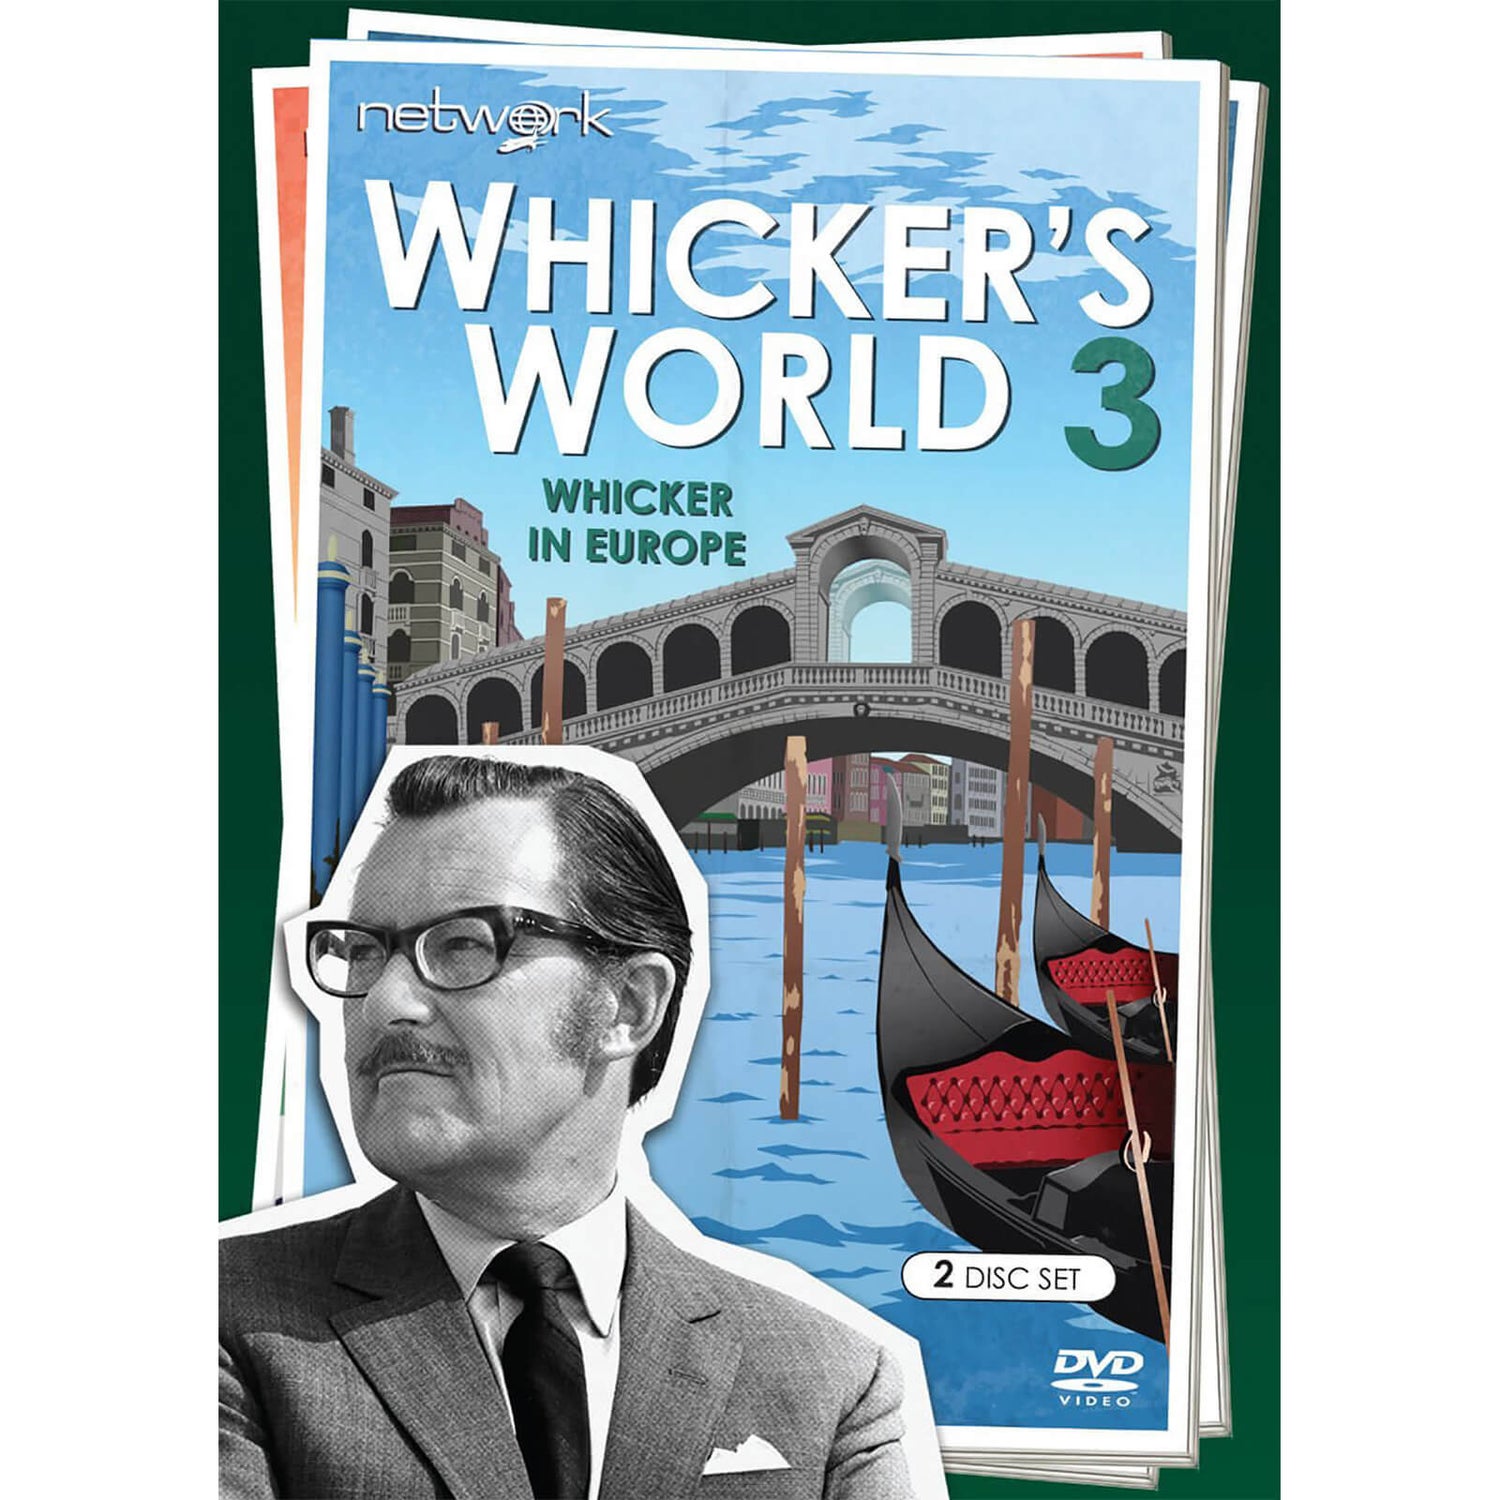 Whicker's World 3: Whicker In Europe